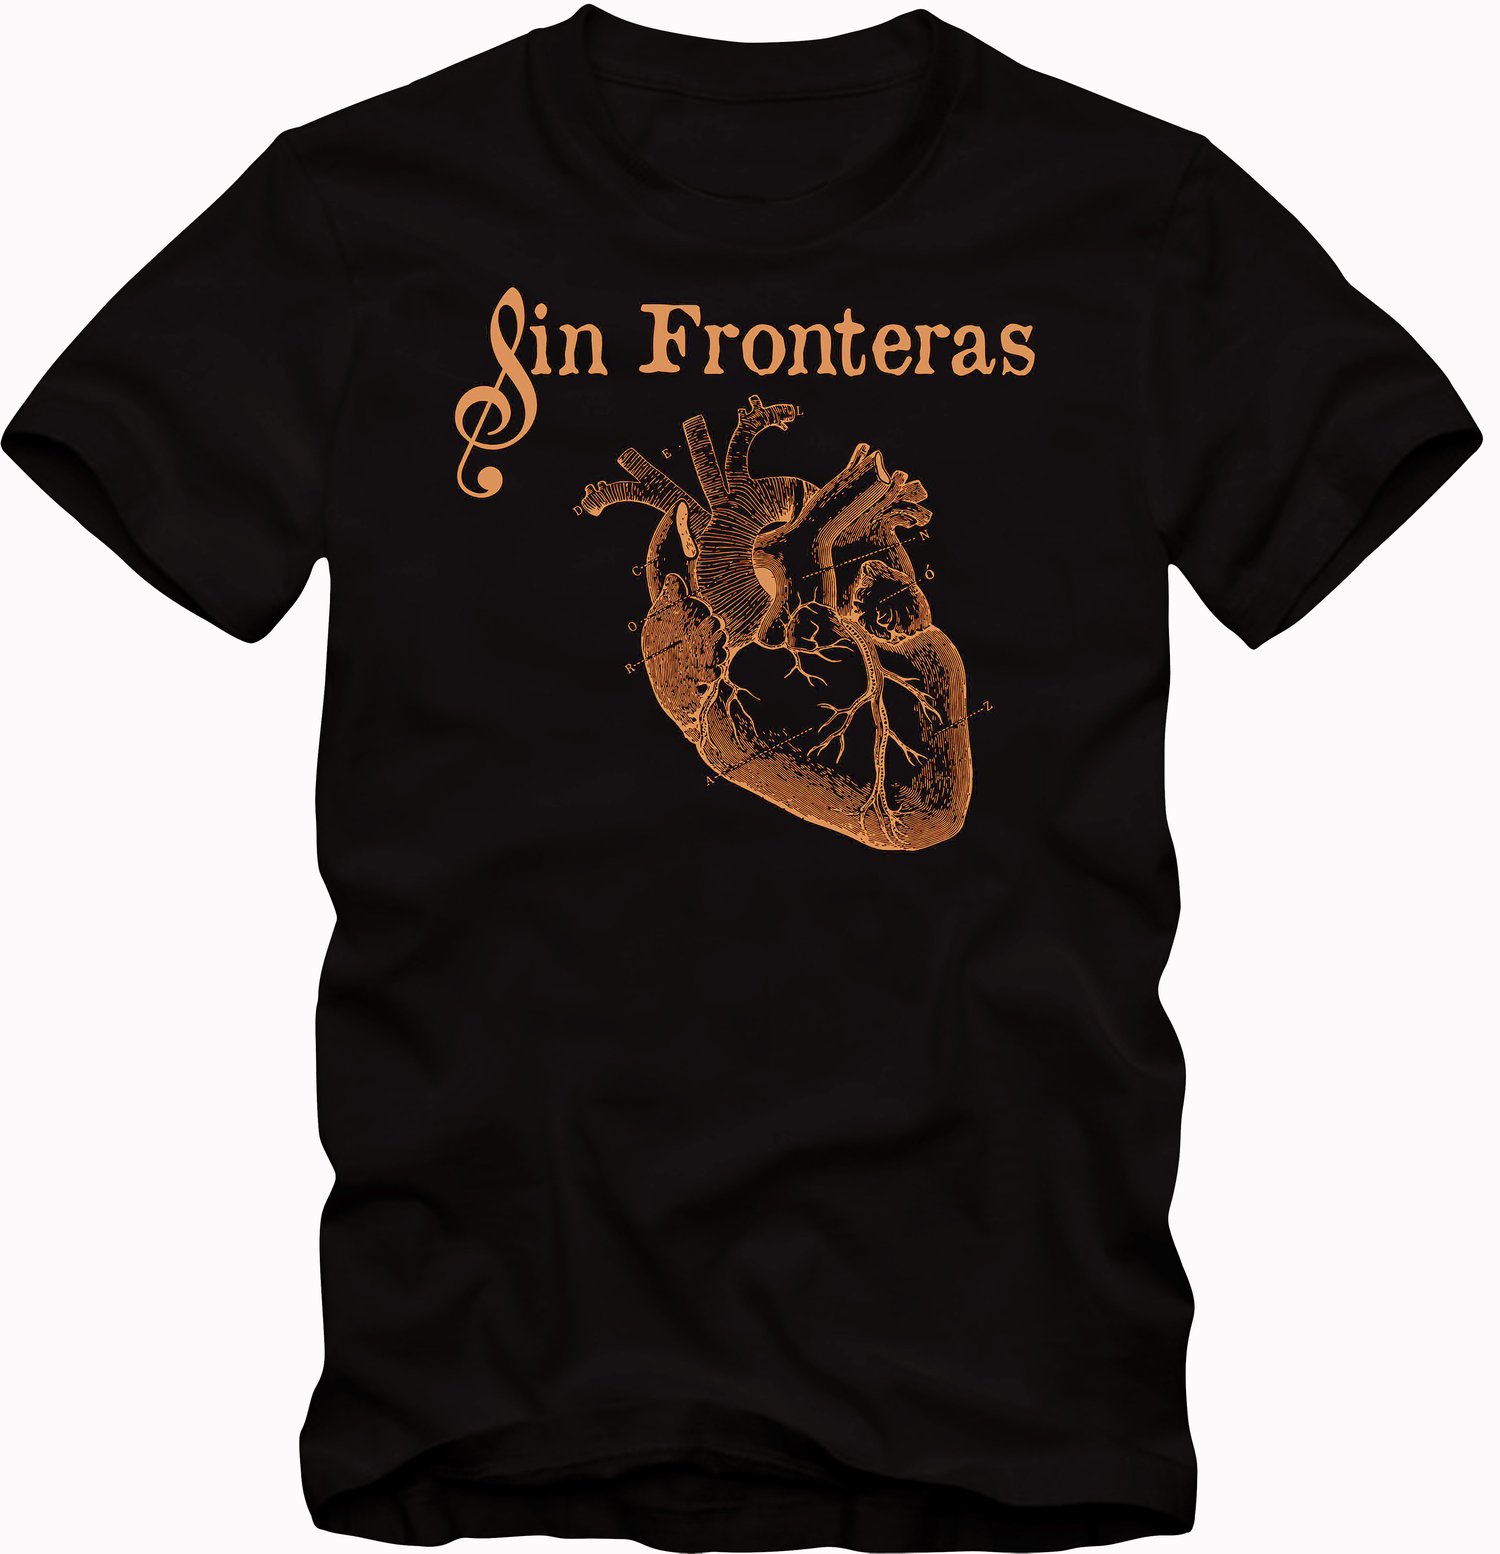 Image of "Sin Fronteras" - The Official T-Shirt of Del Corazón Music - "Unisex" / "Mens"